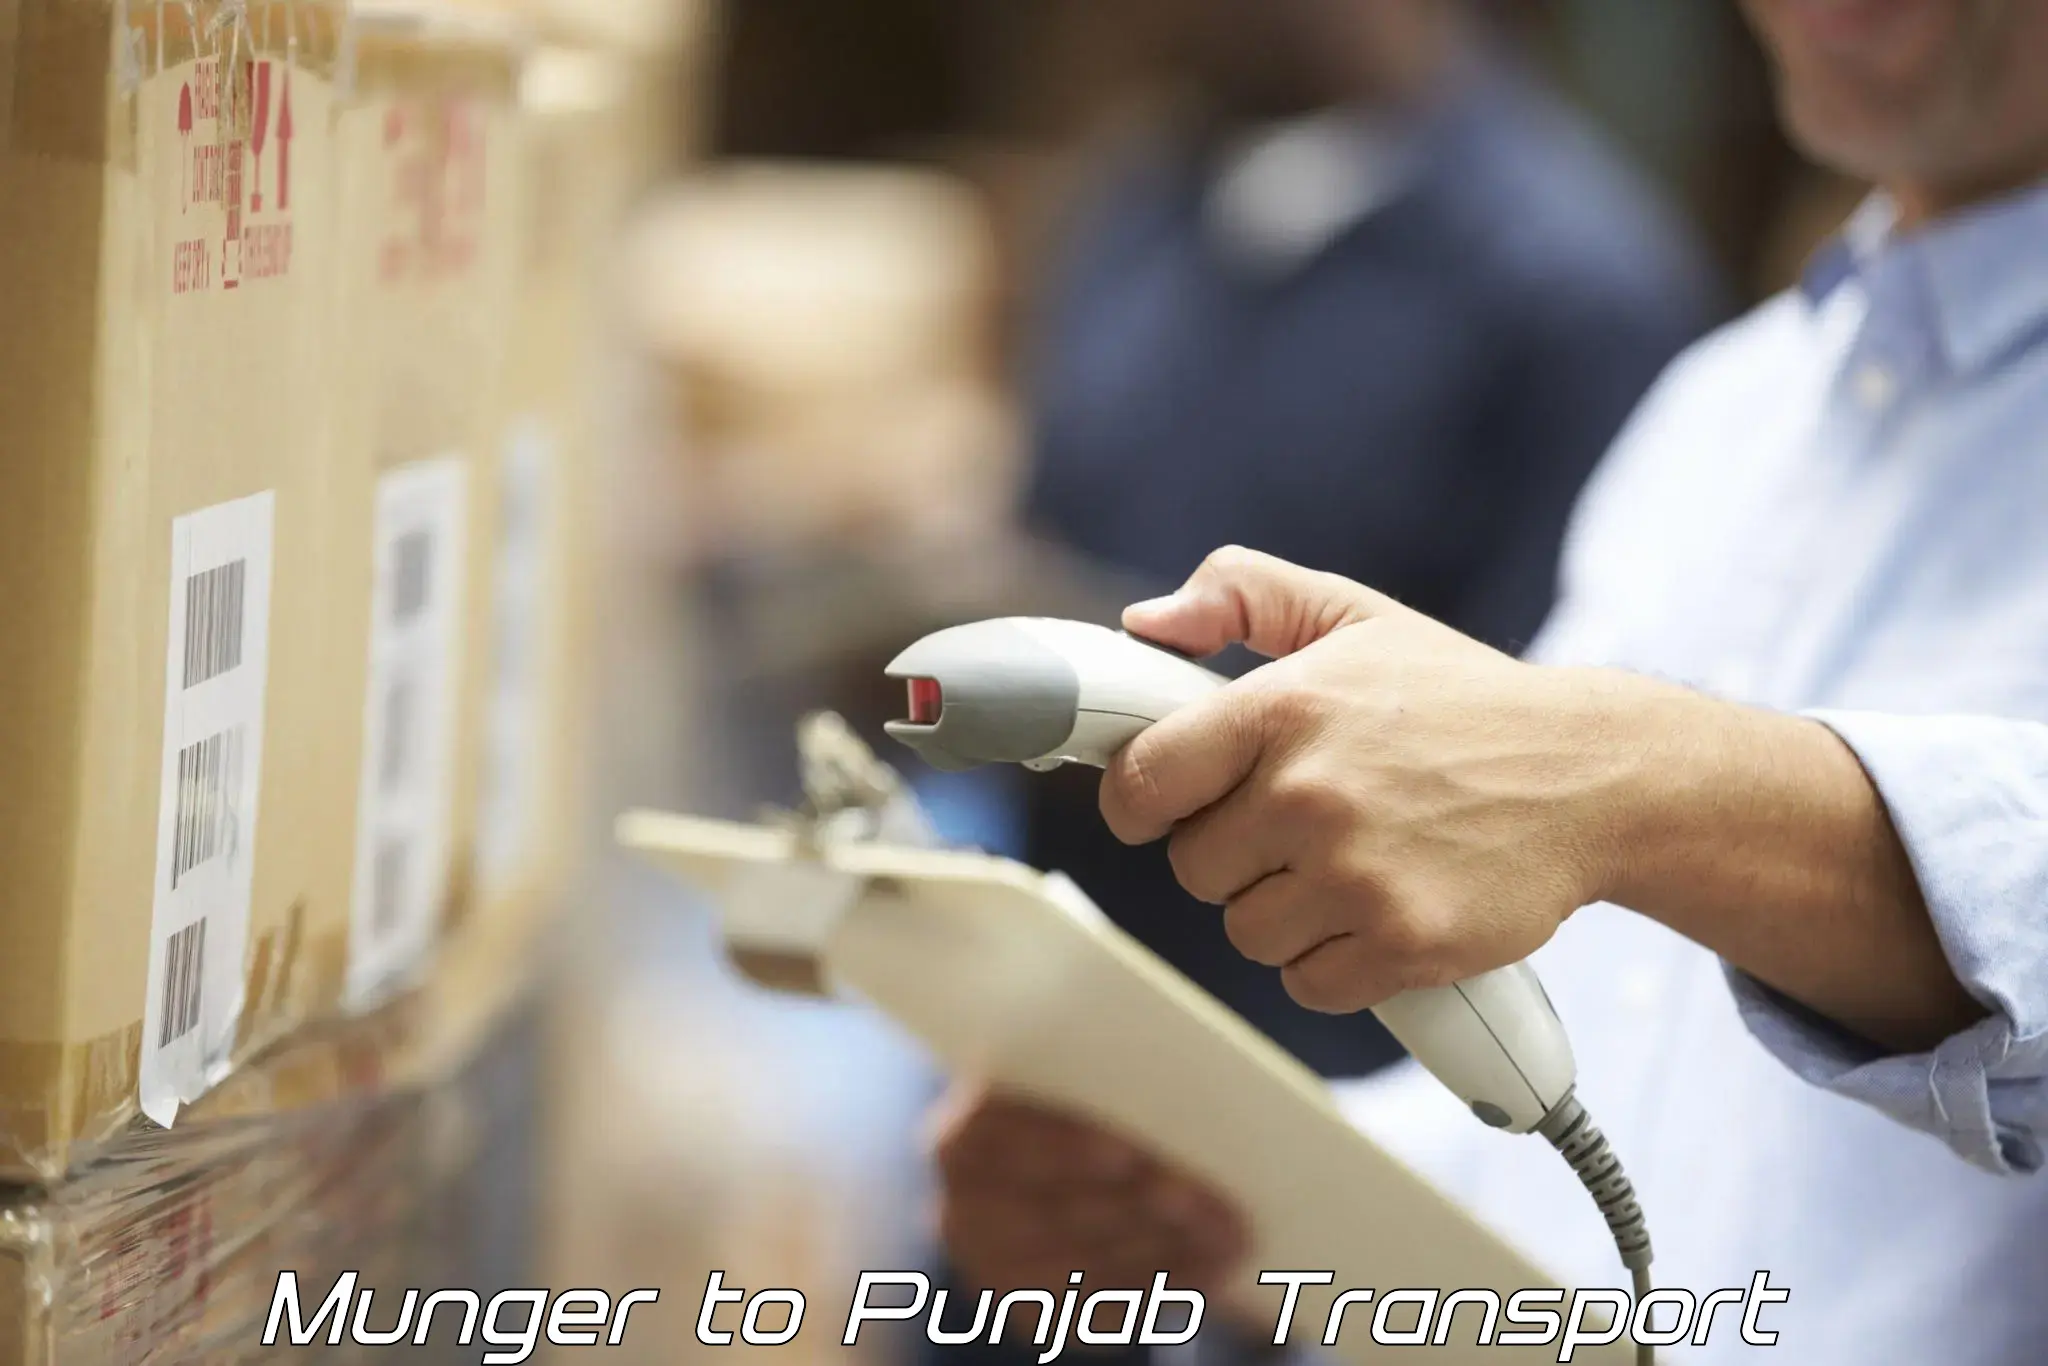 Delivery service Munger to Punjab